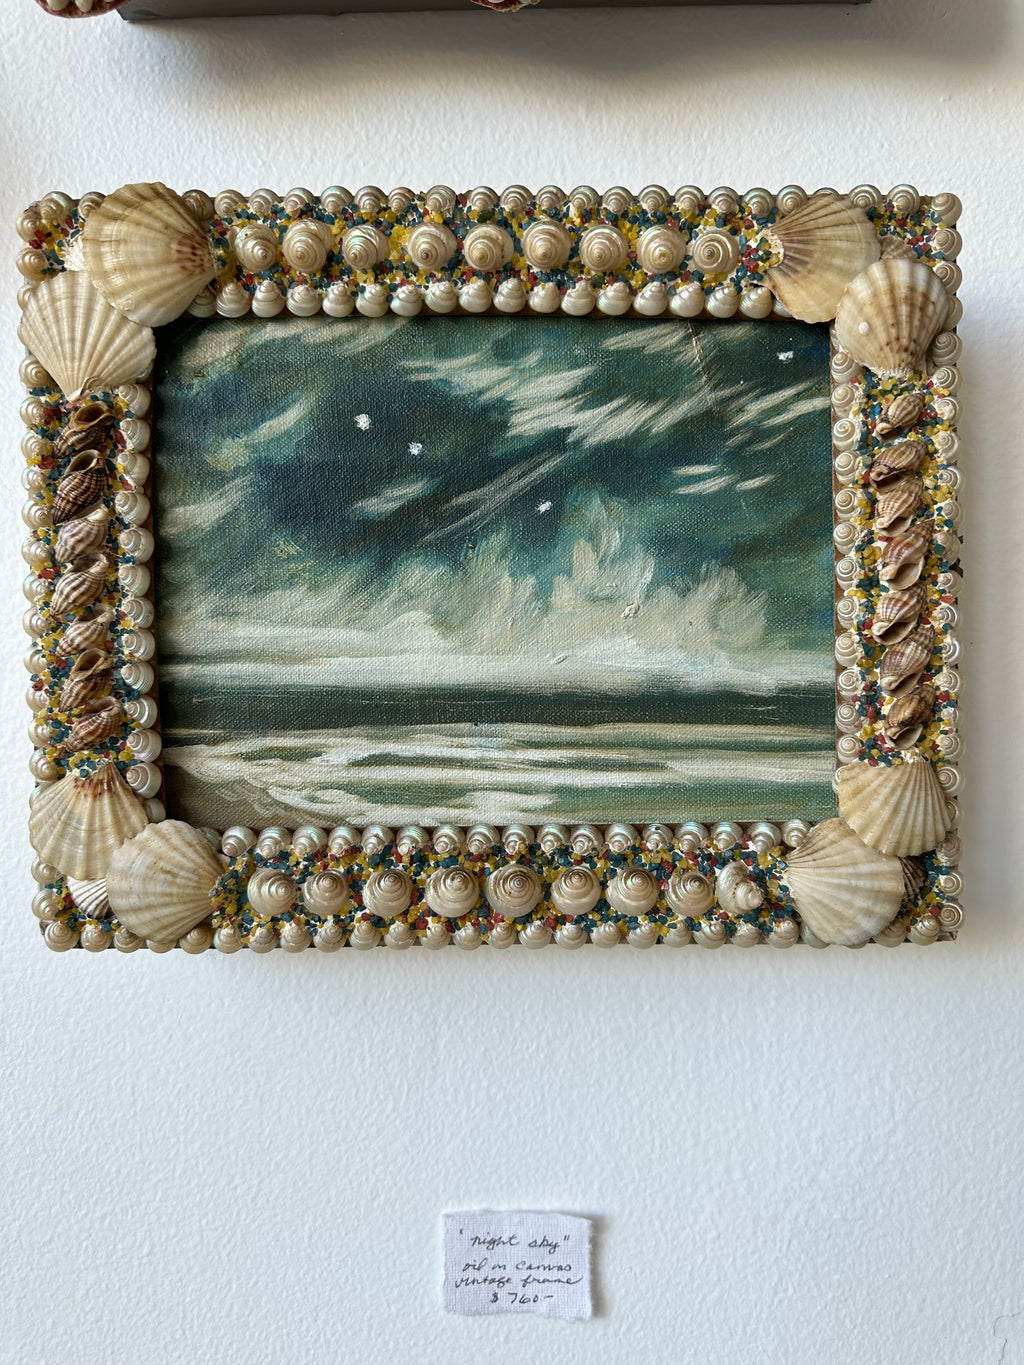 "Night Sky" seascape in oil on canvas, mounted in a vintage seashell frame